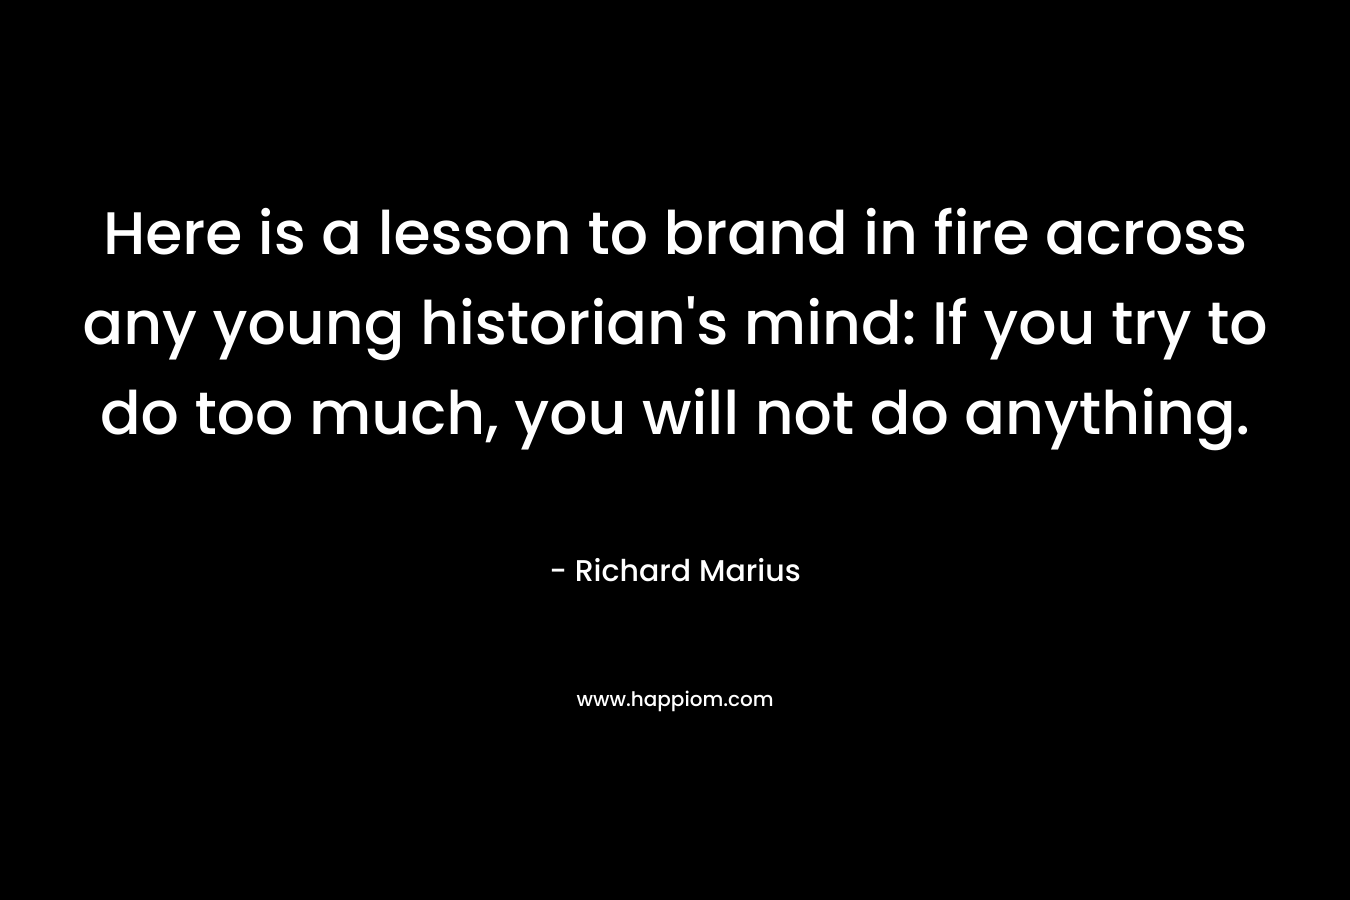 Here is a lesson to brand in fire across any young historian's mind: If you try to do too much, you will not do anything.